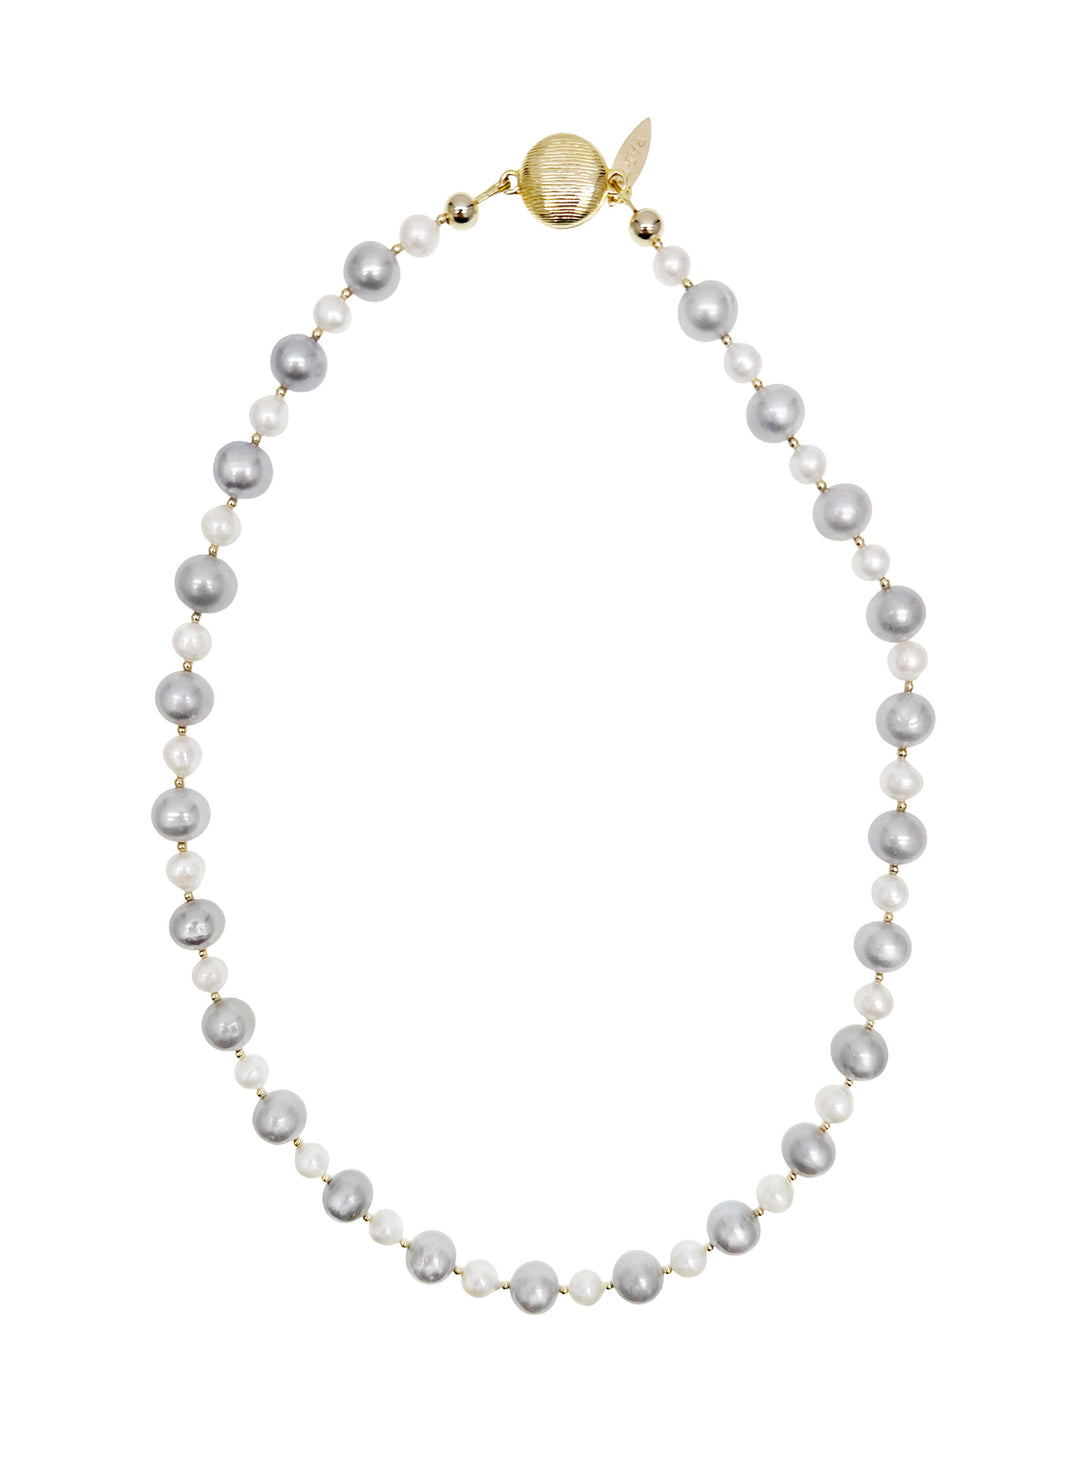 Classic Gray and White Natural Freshwater Pearls Necklace LN076 - FARRA